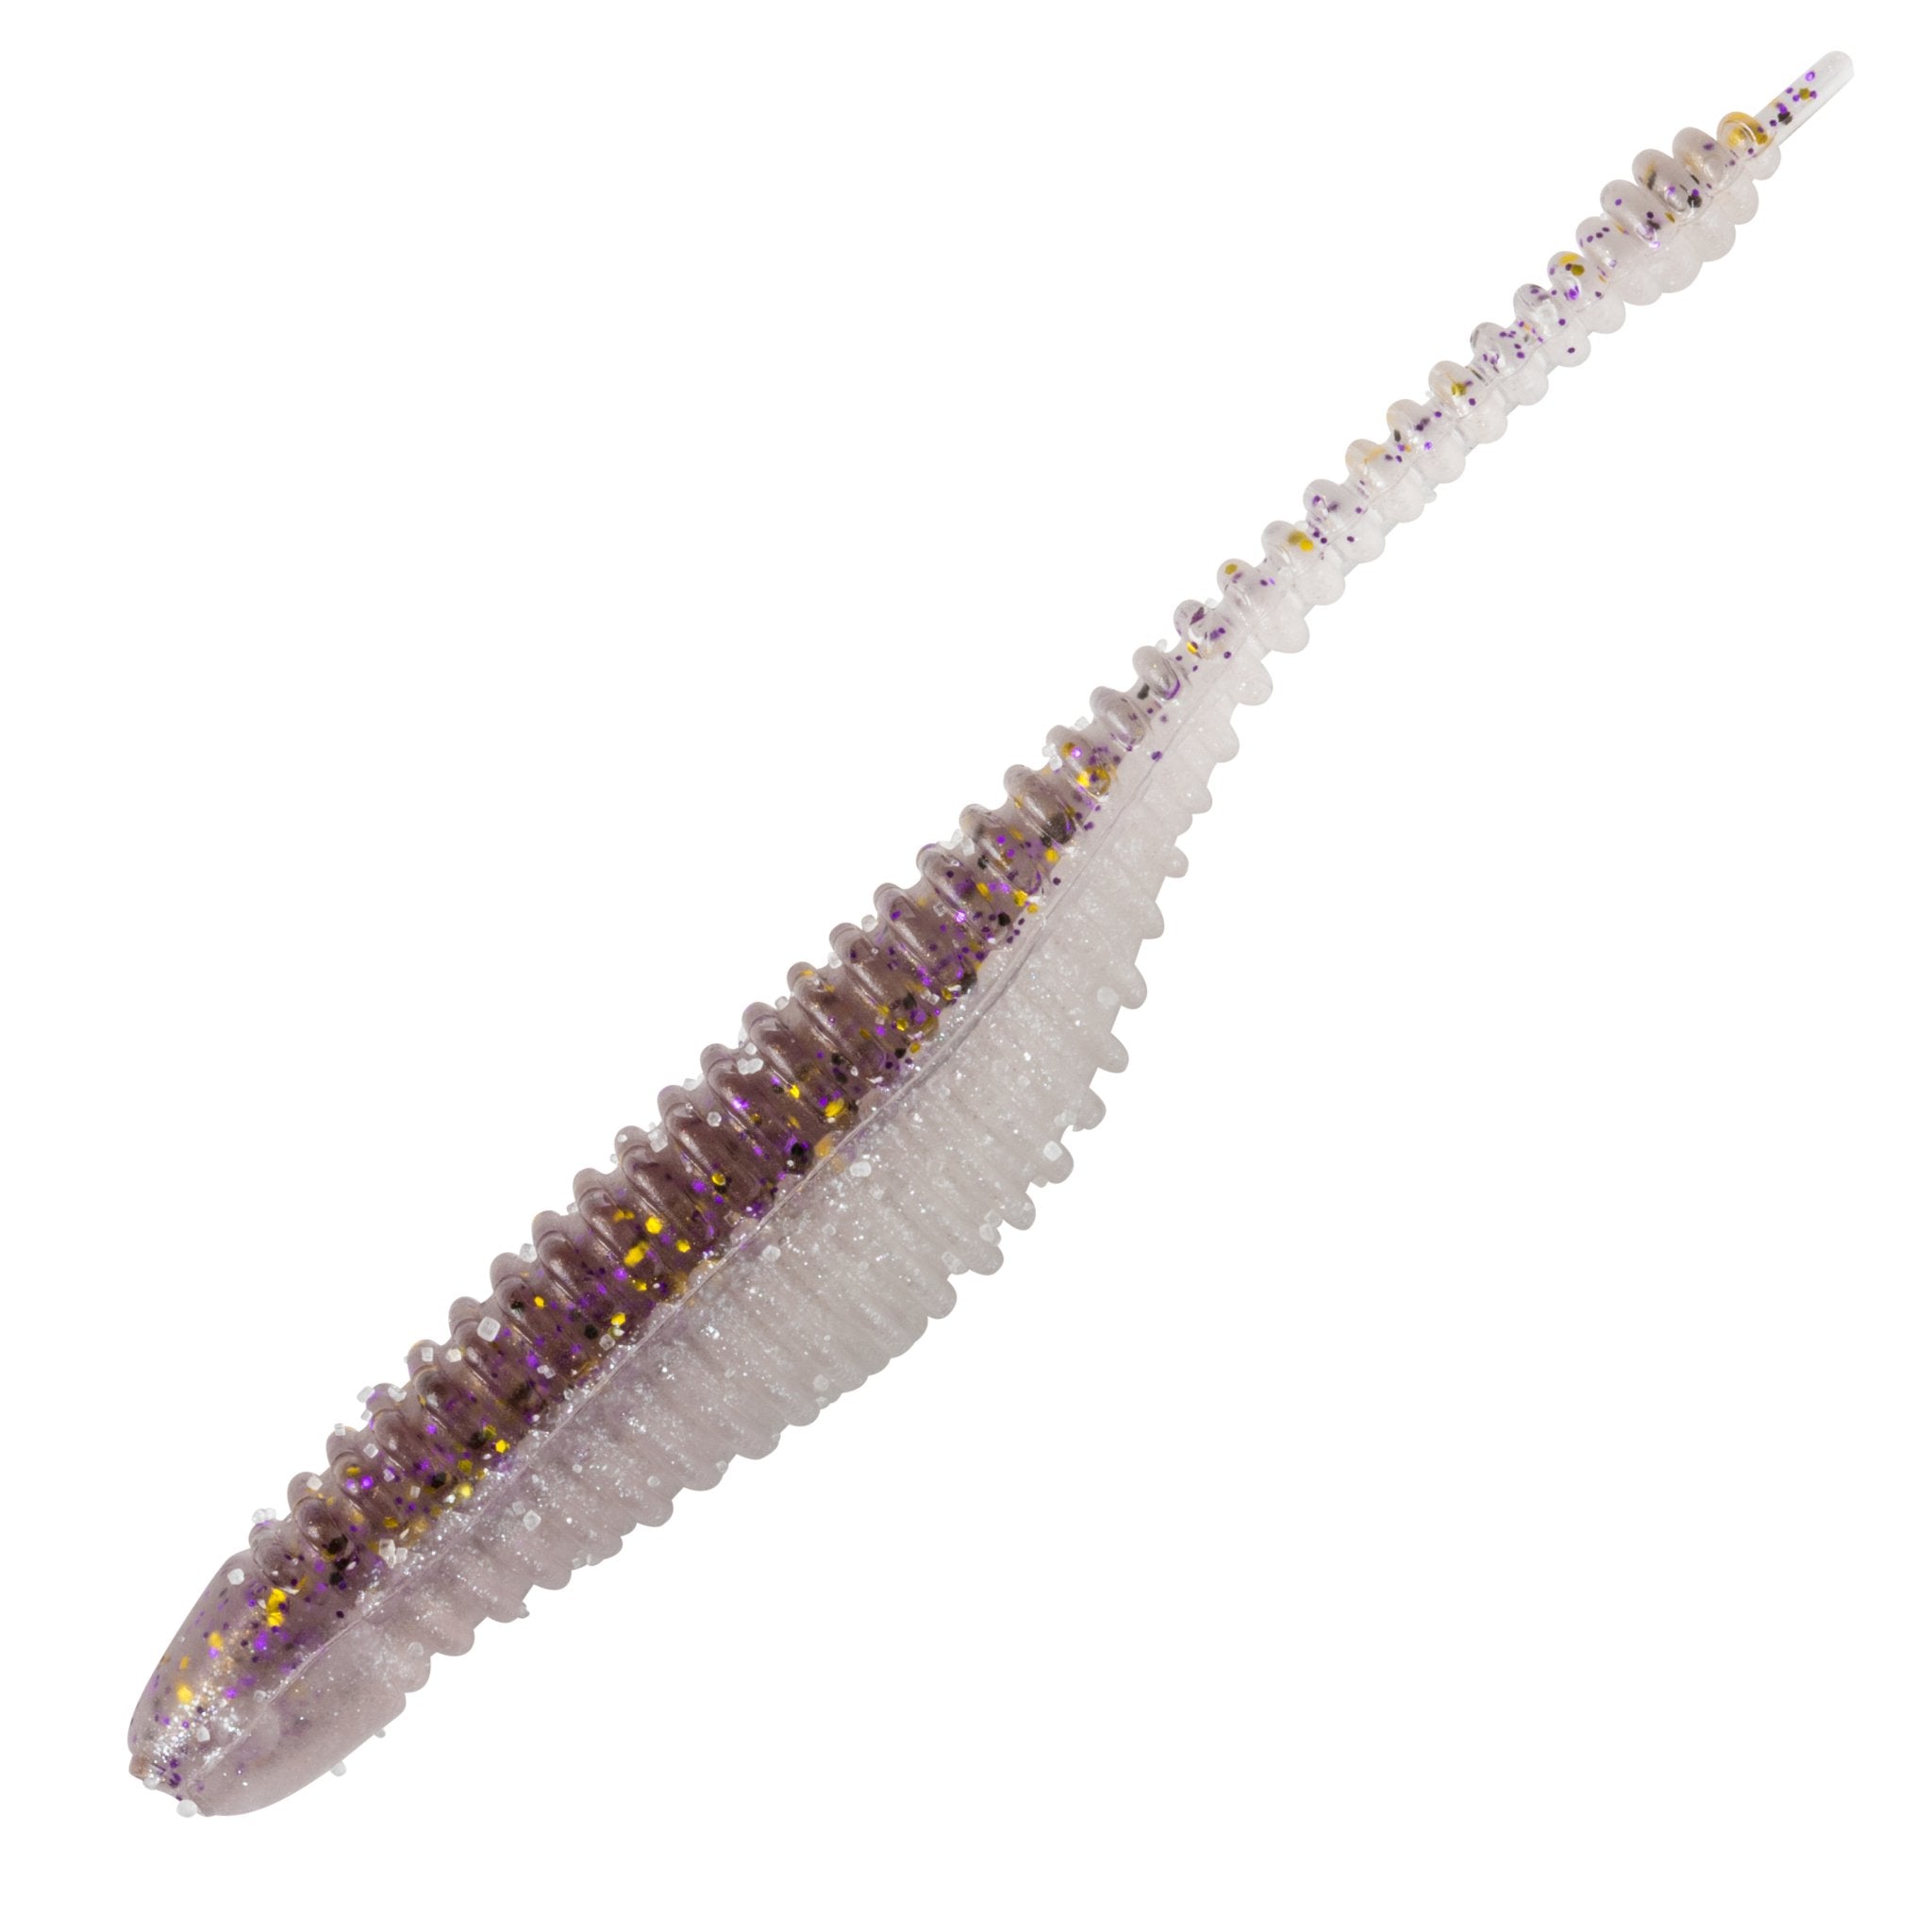 Great Lakes Finesse Drop Minnow - Hamilton Bait and Tackle